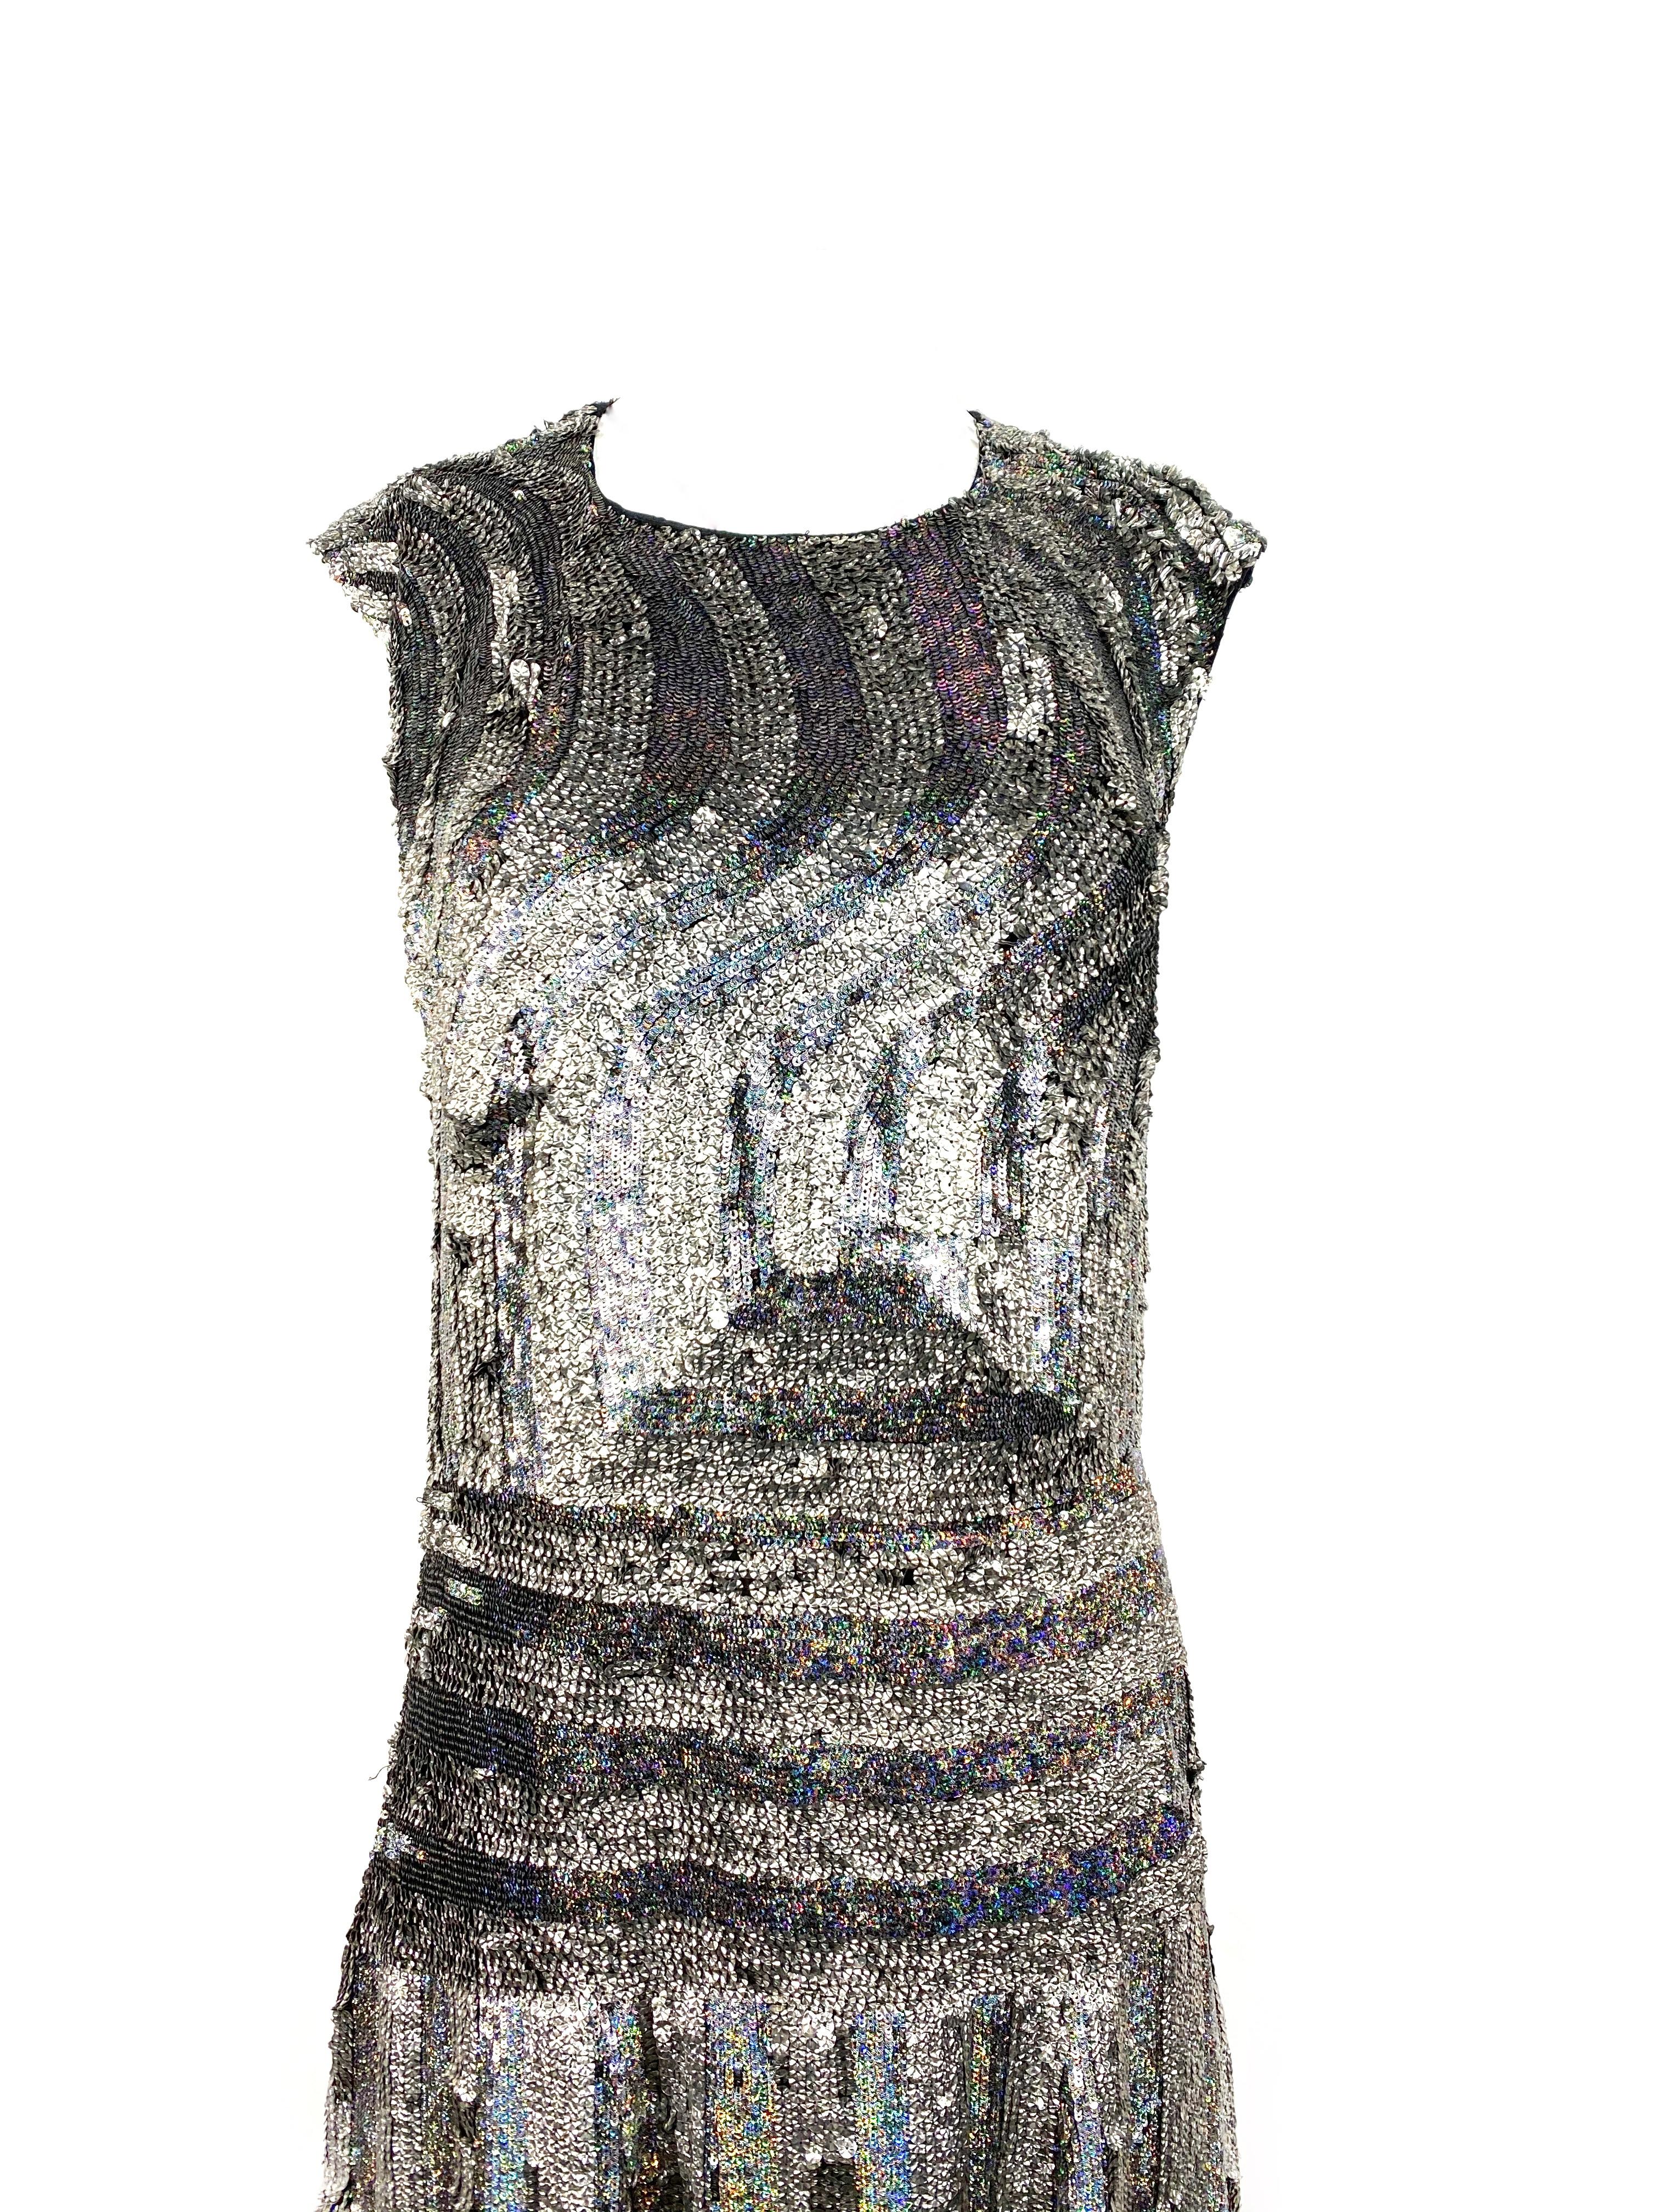 Dries Van Note Black and Grey Metallic Sequin Evening Dress Size 42

Product details:
Size 42
Sleeveless and midi length
Featuring striped pattern design
Rear zip and hook closure
